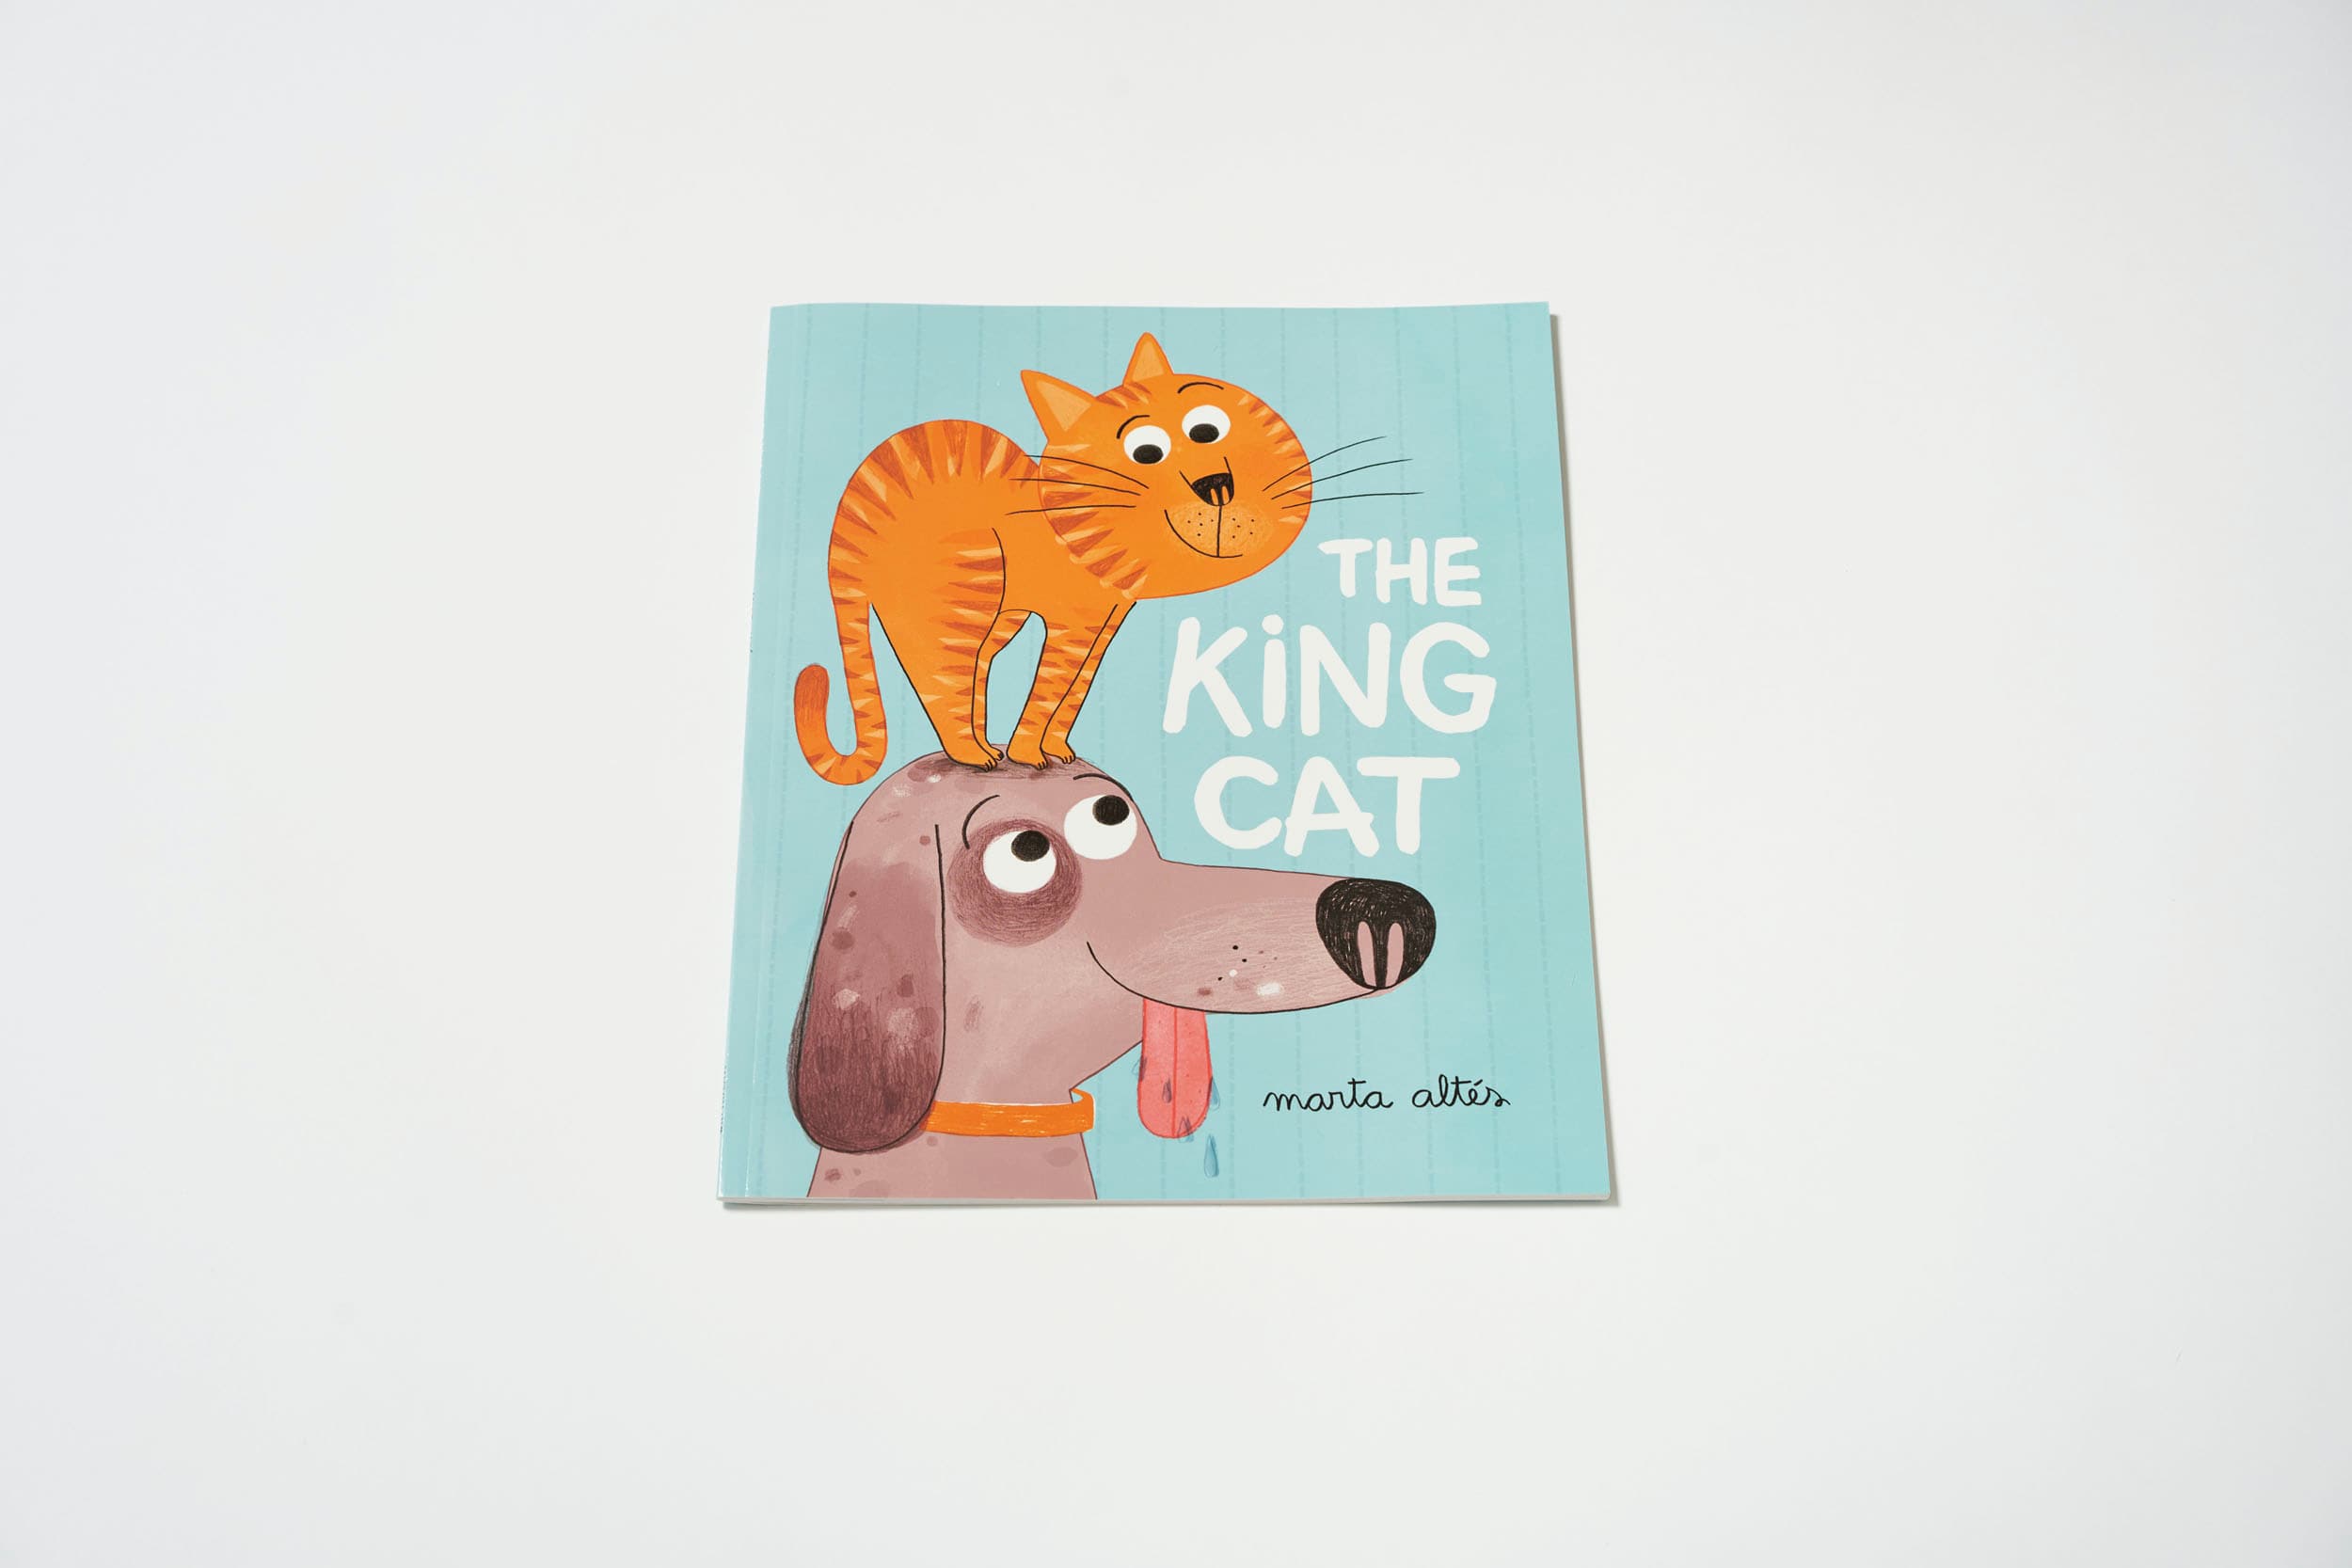 Image of a book called 'The King Cat' which has a cover showing an illustration of a smiling cat sitting on a smiling dog's head.